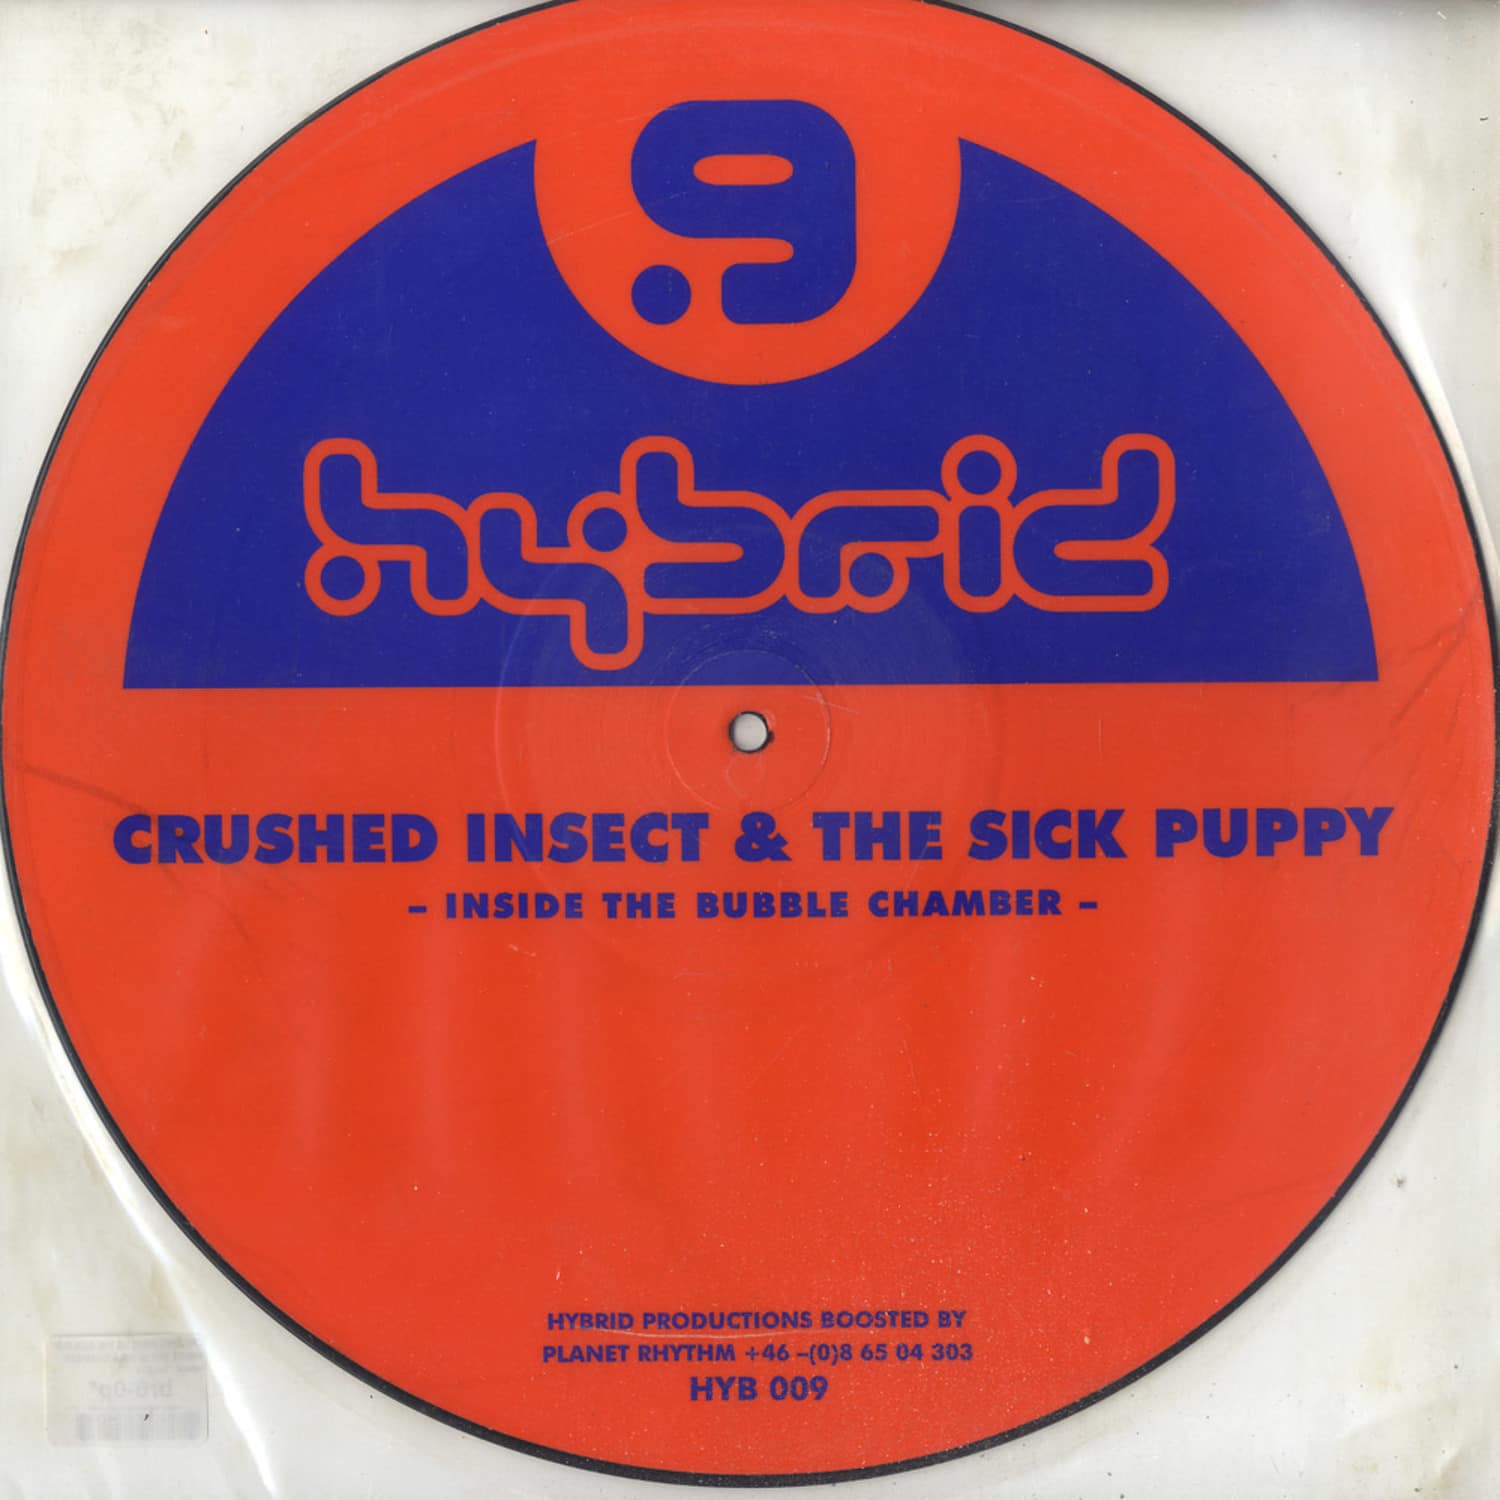 Crushed Insect & The Sick Puppy - INSIDE THE BUBBLE CHAMBER